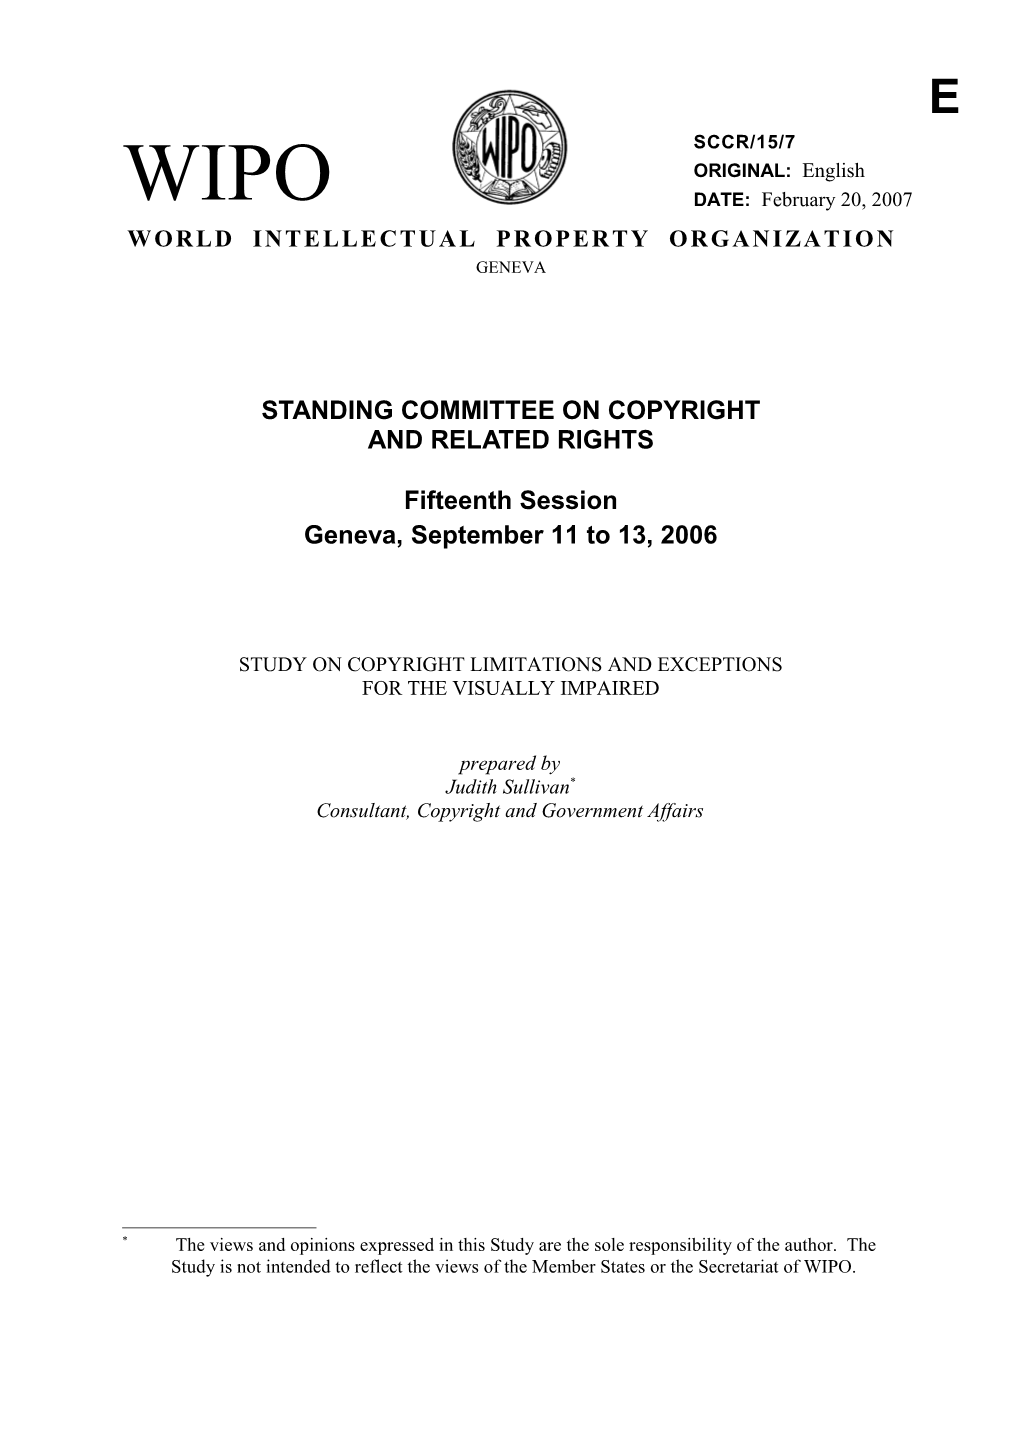 SCCR/15/7: Study on Copyright Limitations and Exceptions for the Visually Impaired